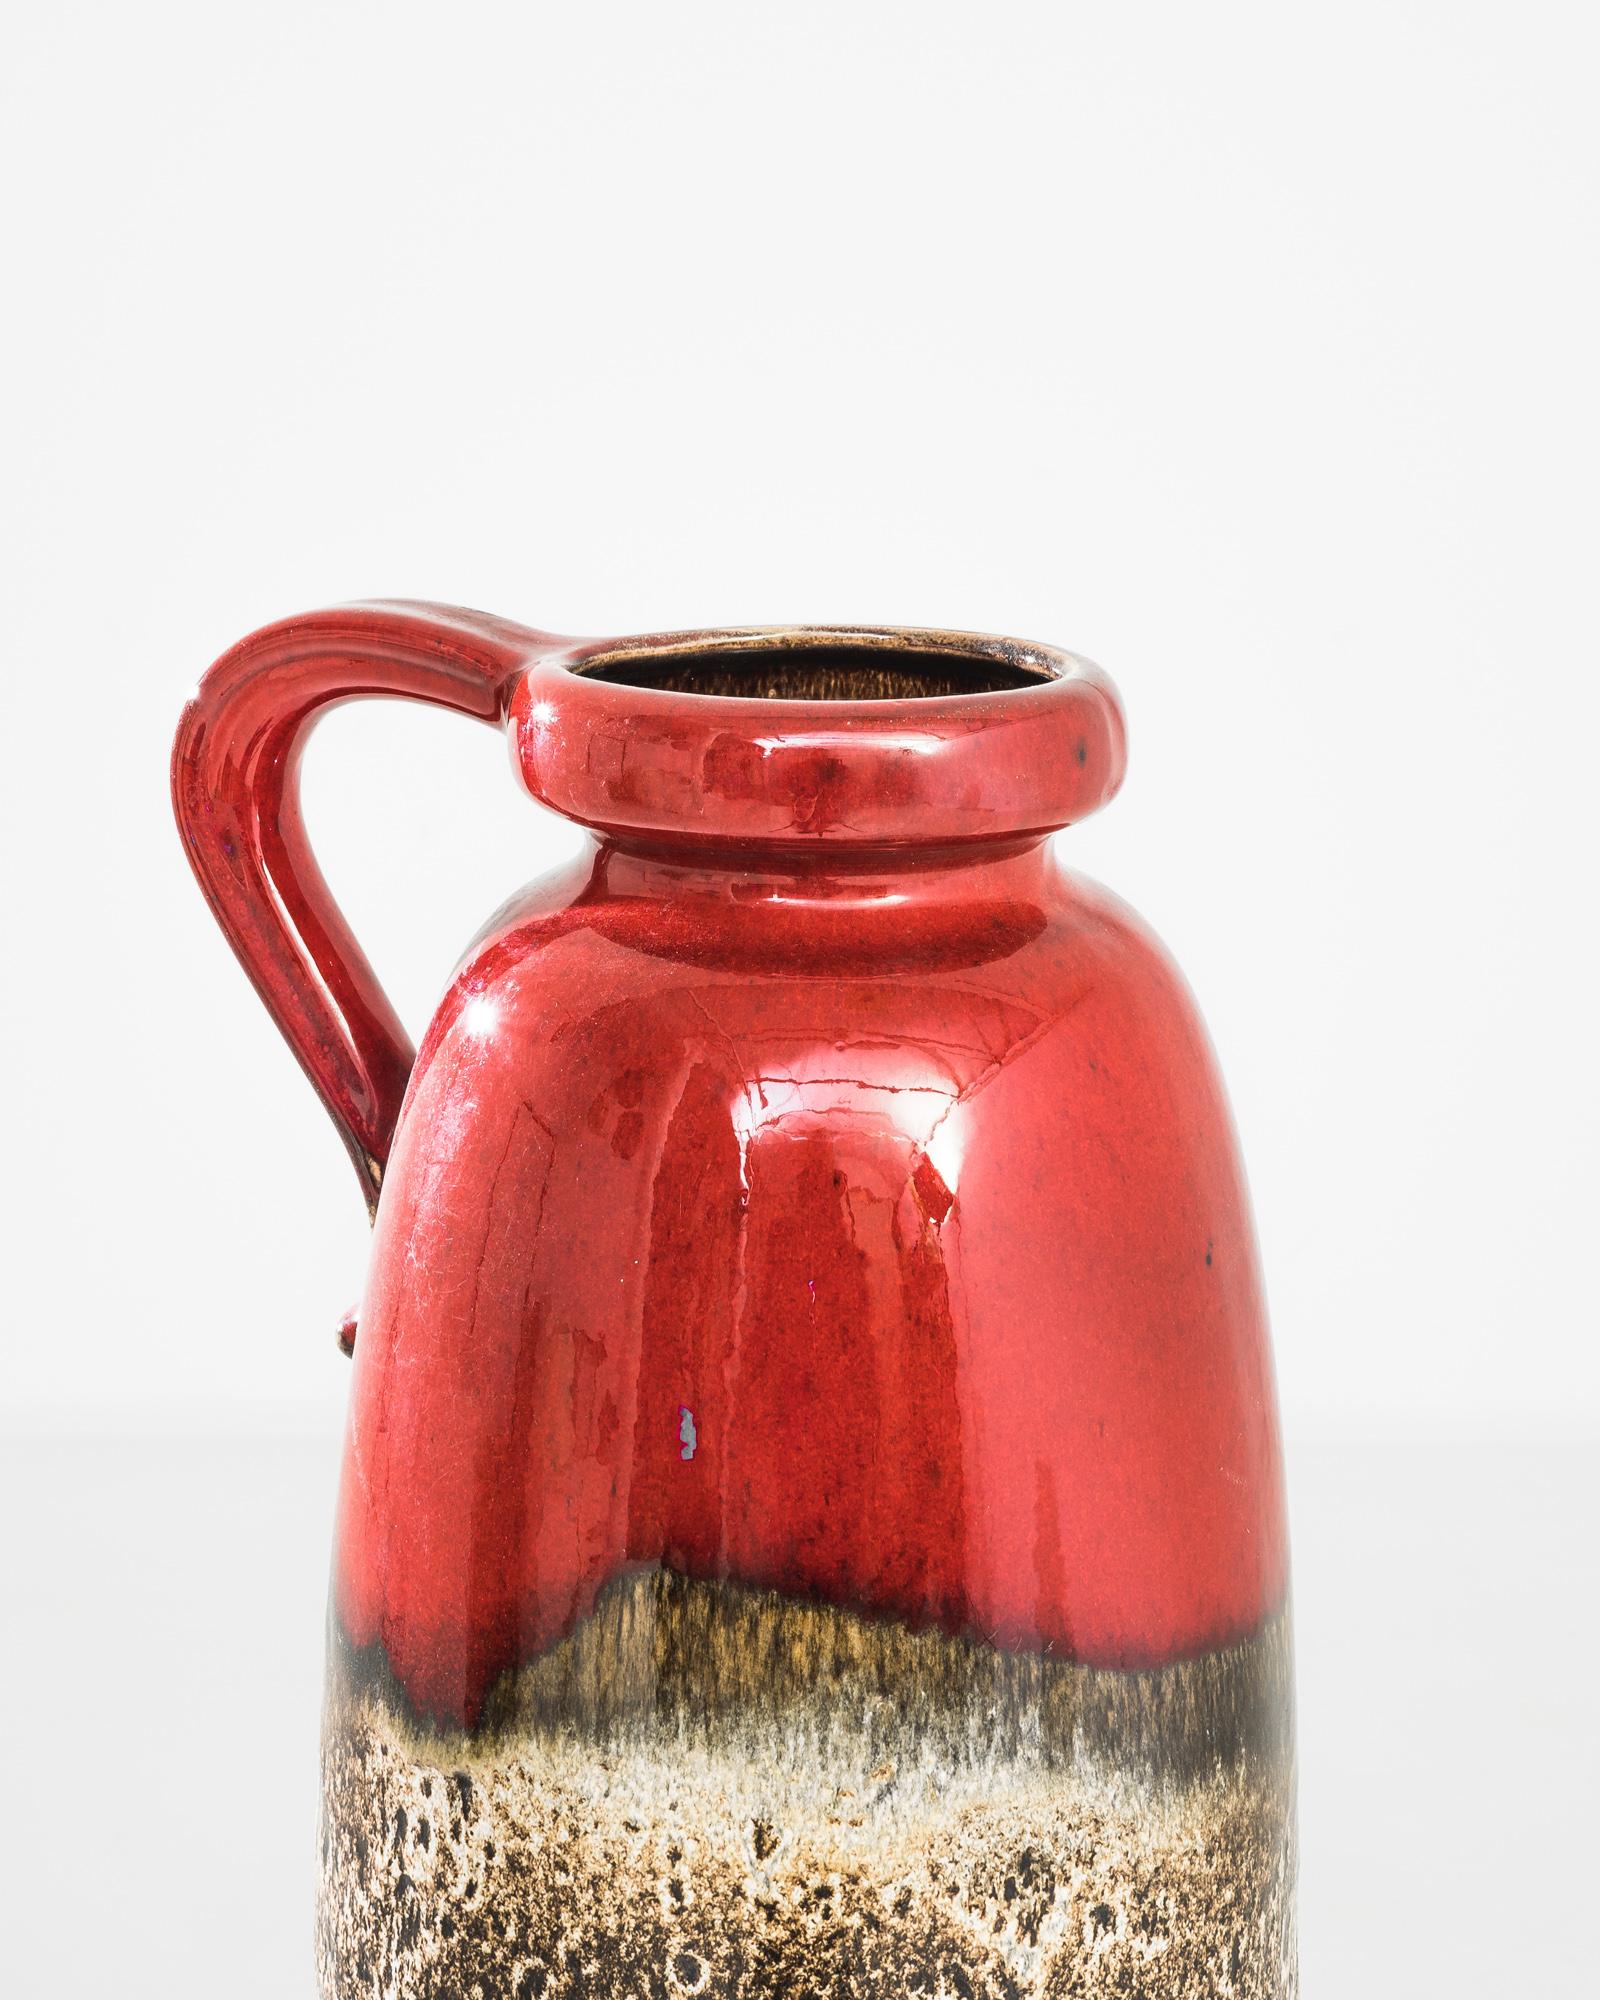 This vibrant 1960s West German ceramic vase is a splendid example of mid-century modern design. Its bold red glaze, which smoothly transitions into a speckled natural finish, captures the eye and evokes a sense of dynamic contrast. The sleek,